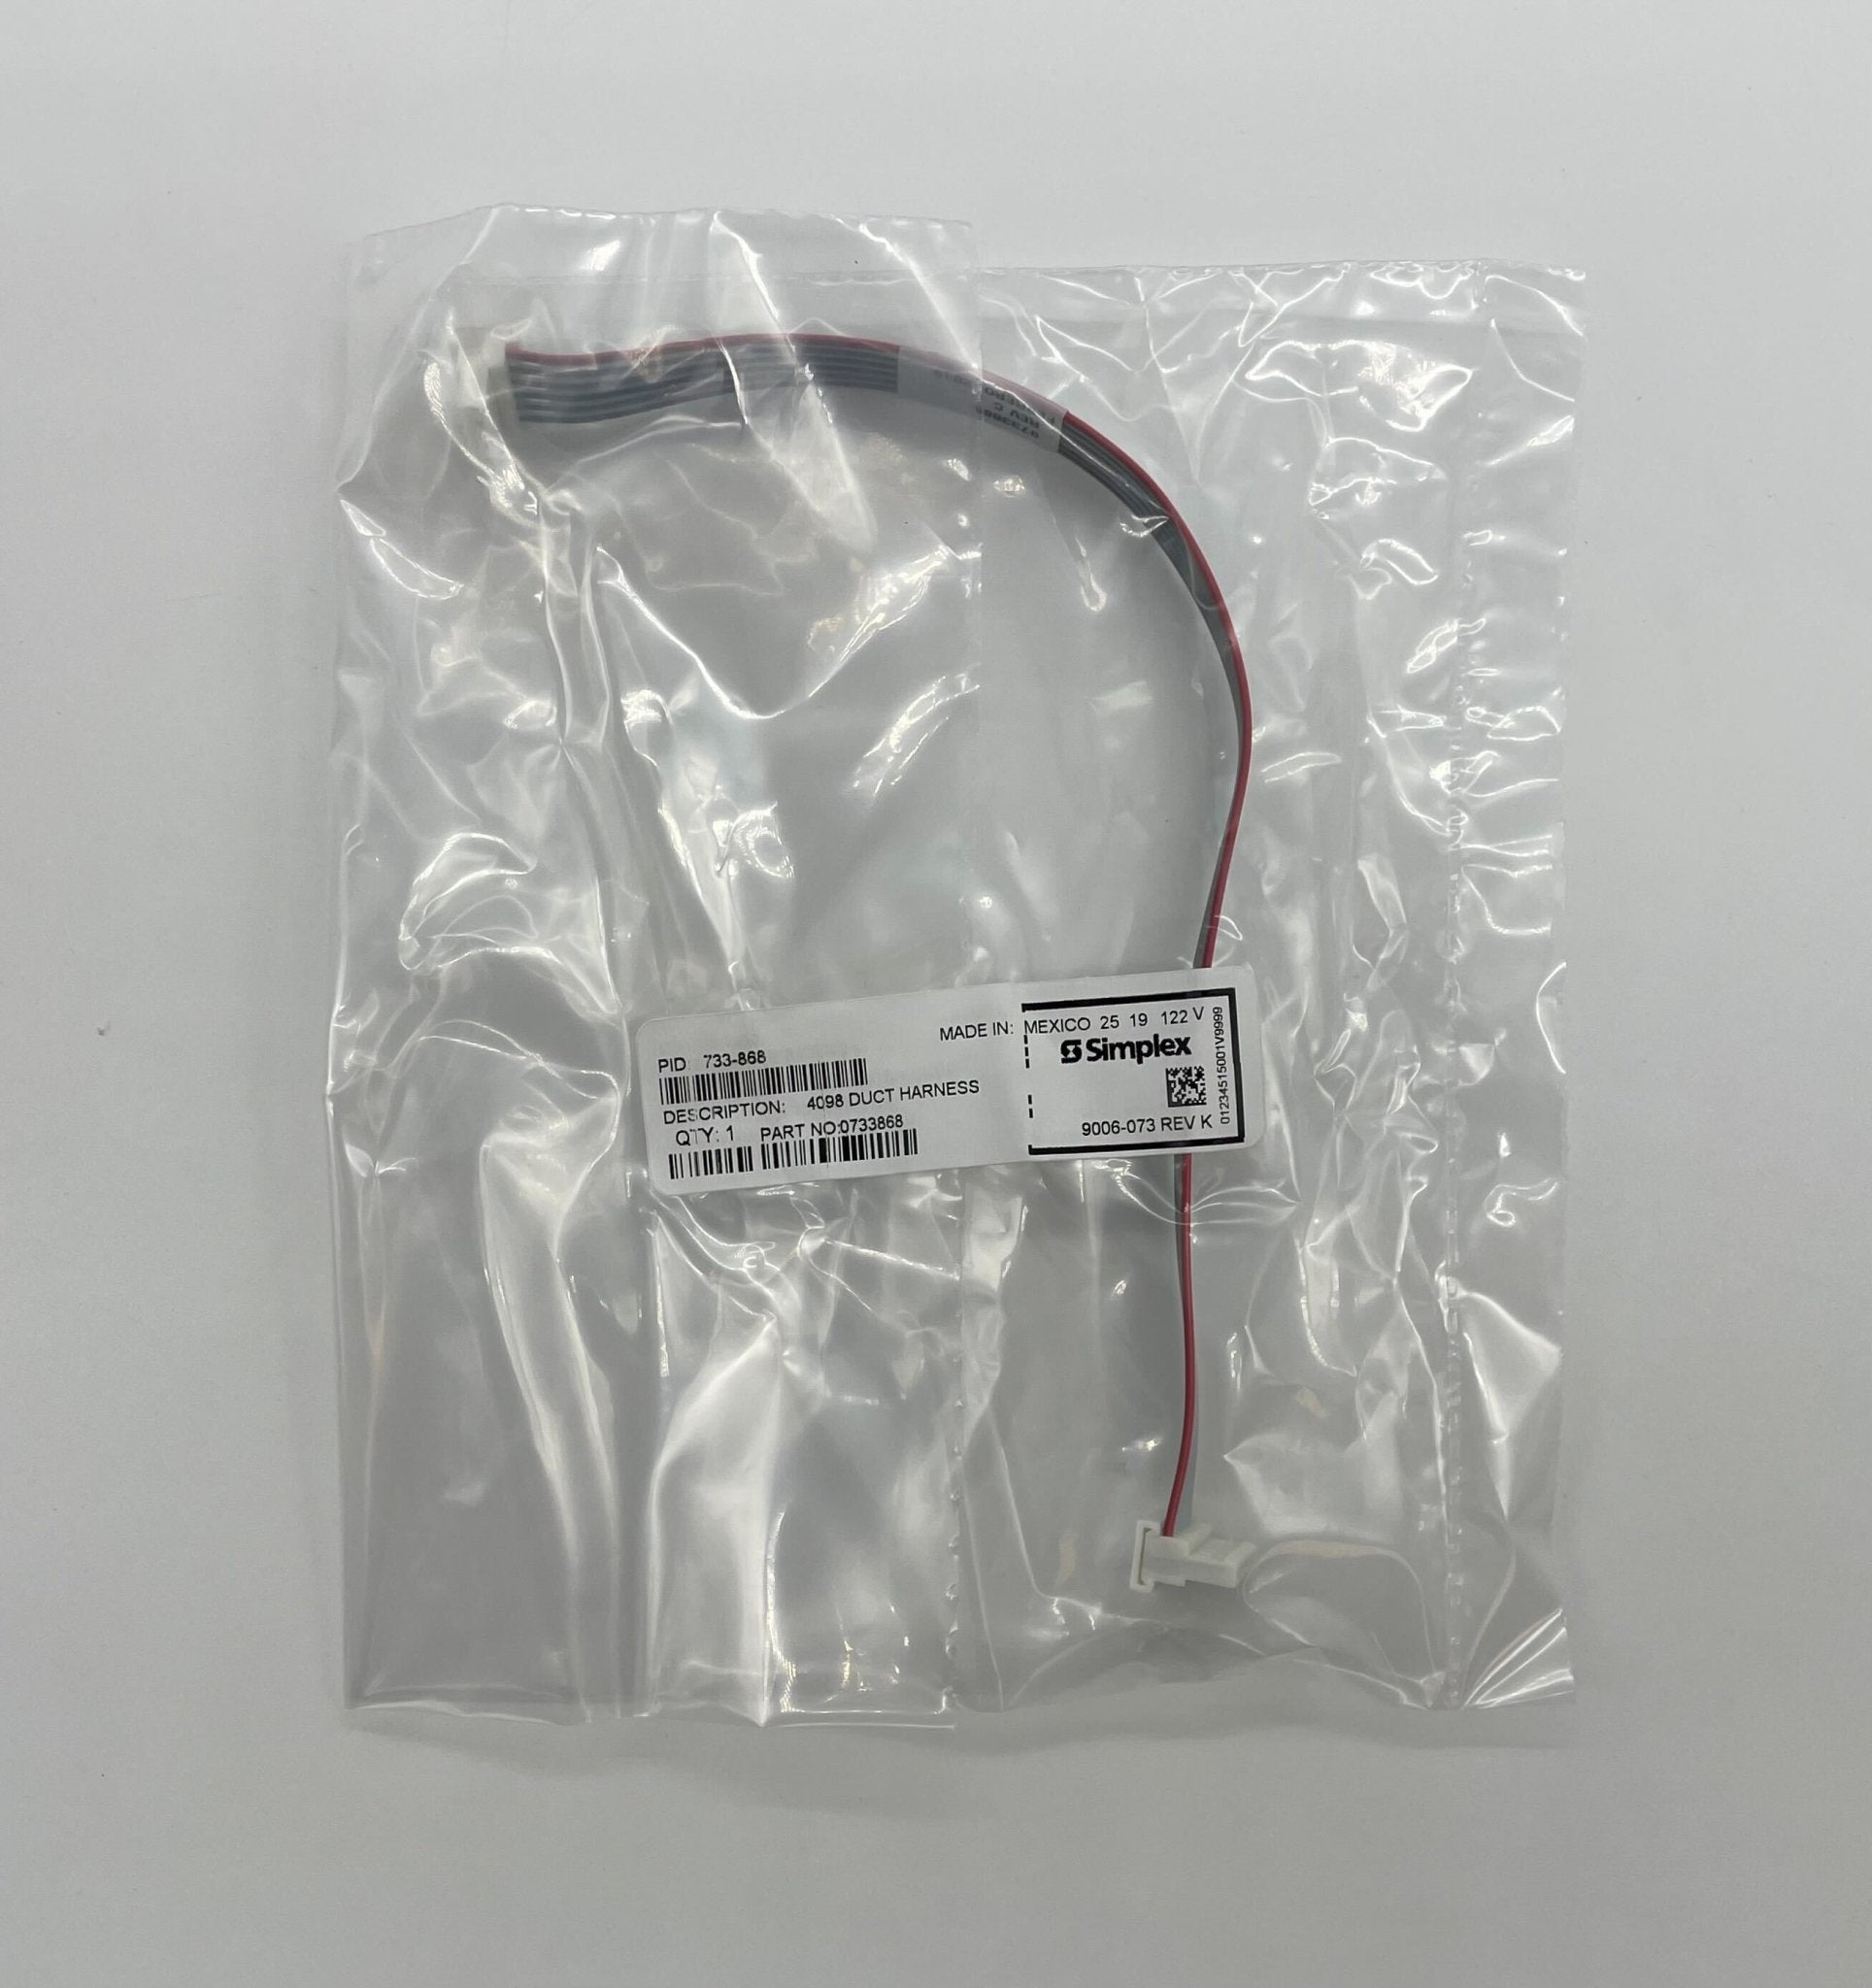 Simplex 733-868 Duct Harness - The Fire Alarm Supplier